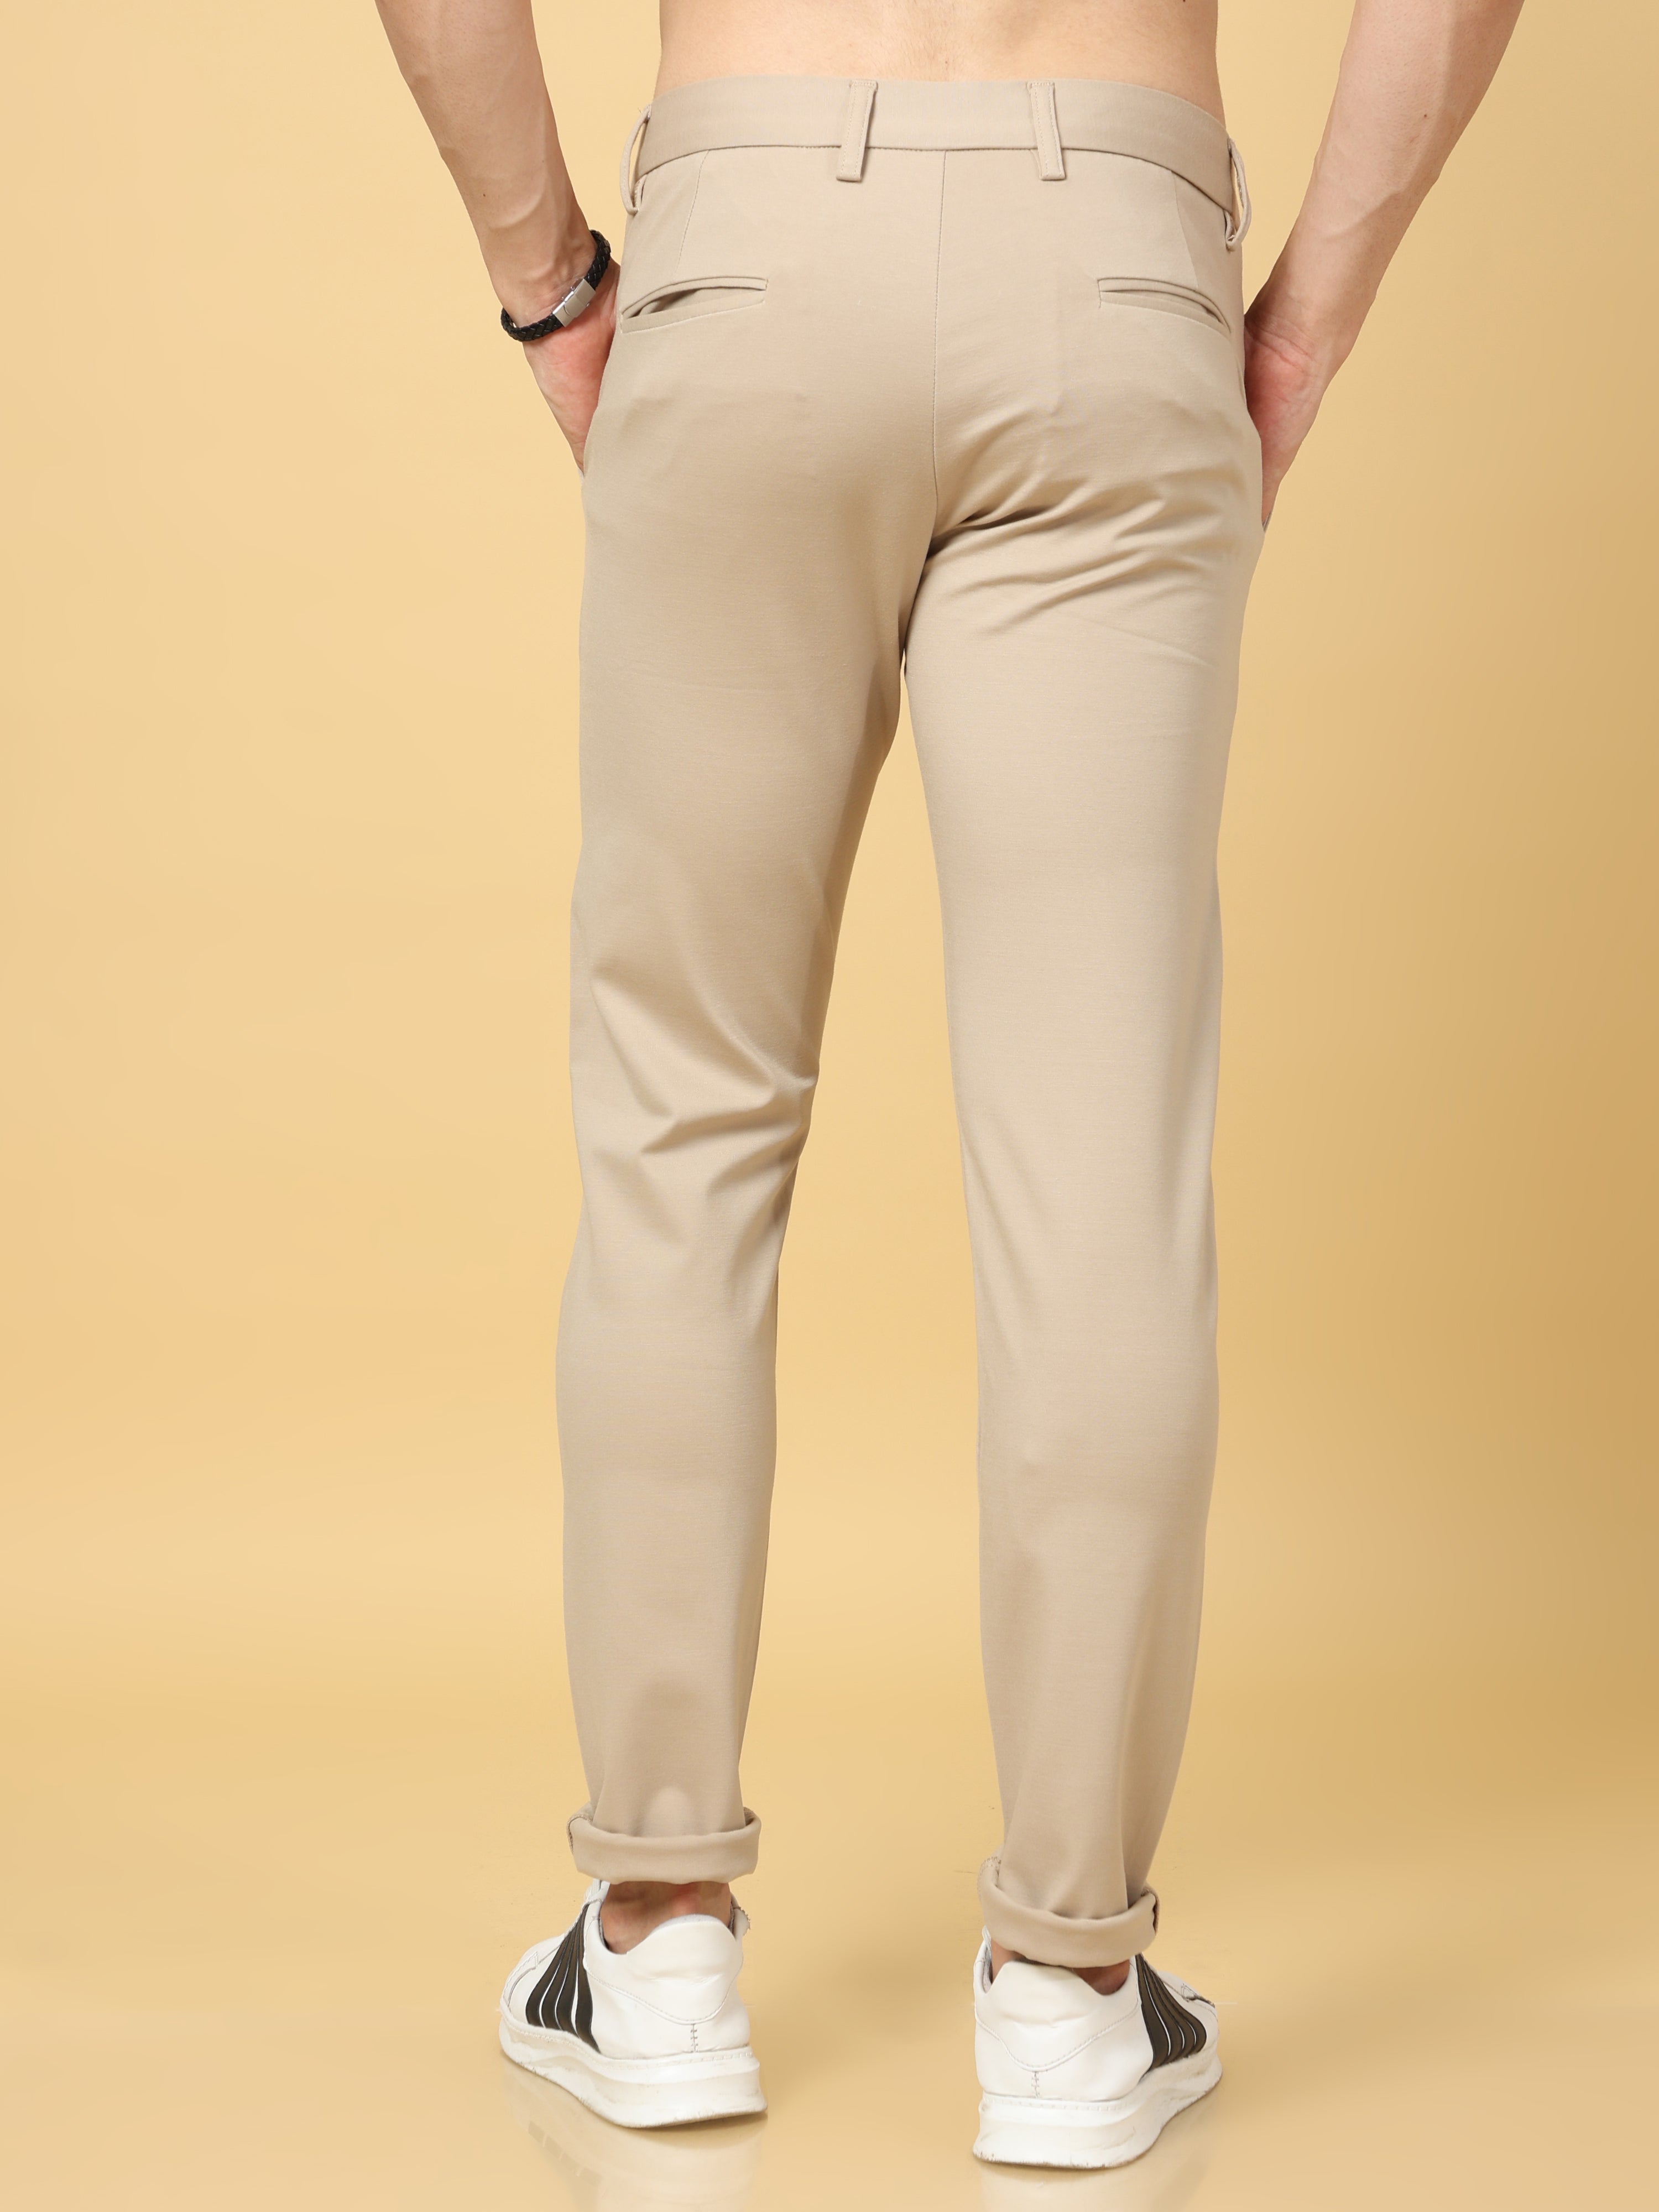 Men's formal Office Outfits with Beige Colour Pants Combination Ideas |  Smart casual outfit, Mens business casual outfits, Stylish men casual